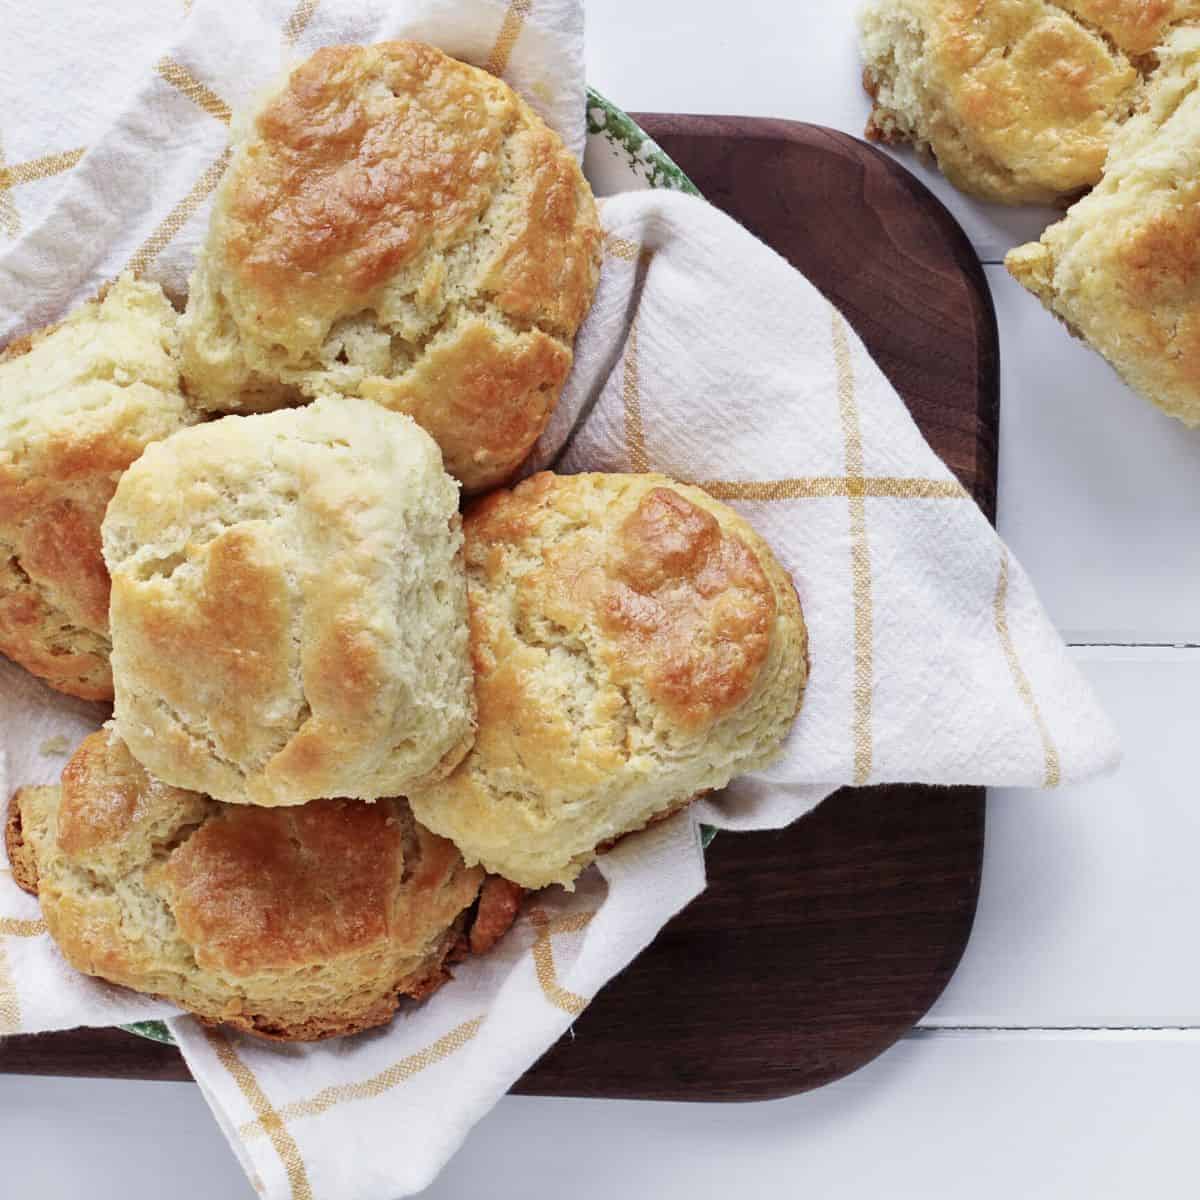 How to Reheat Biscuits and Make Them Taste Fresh